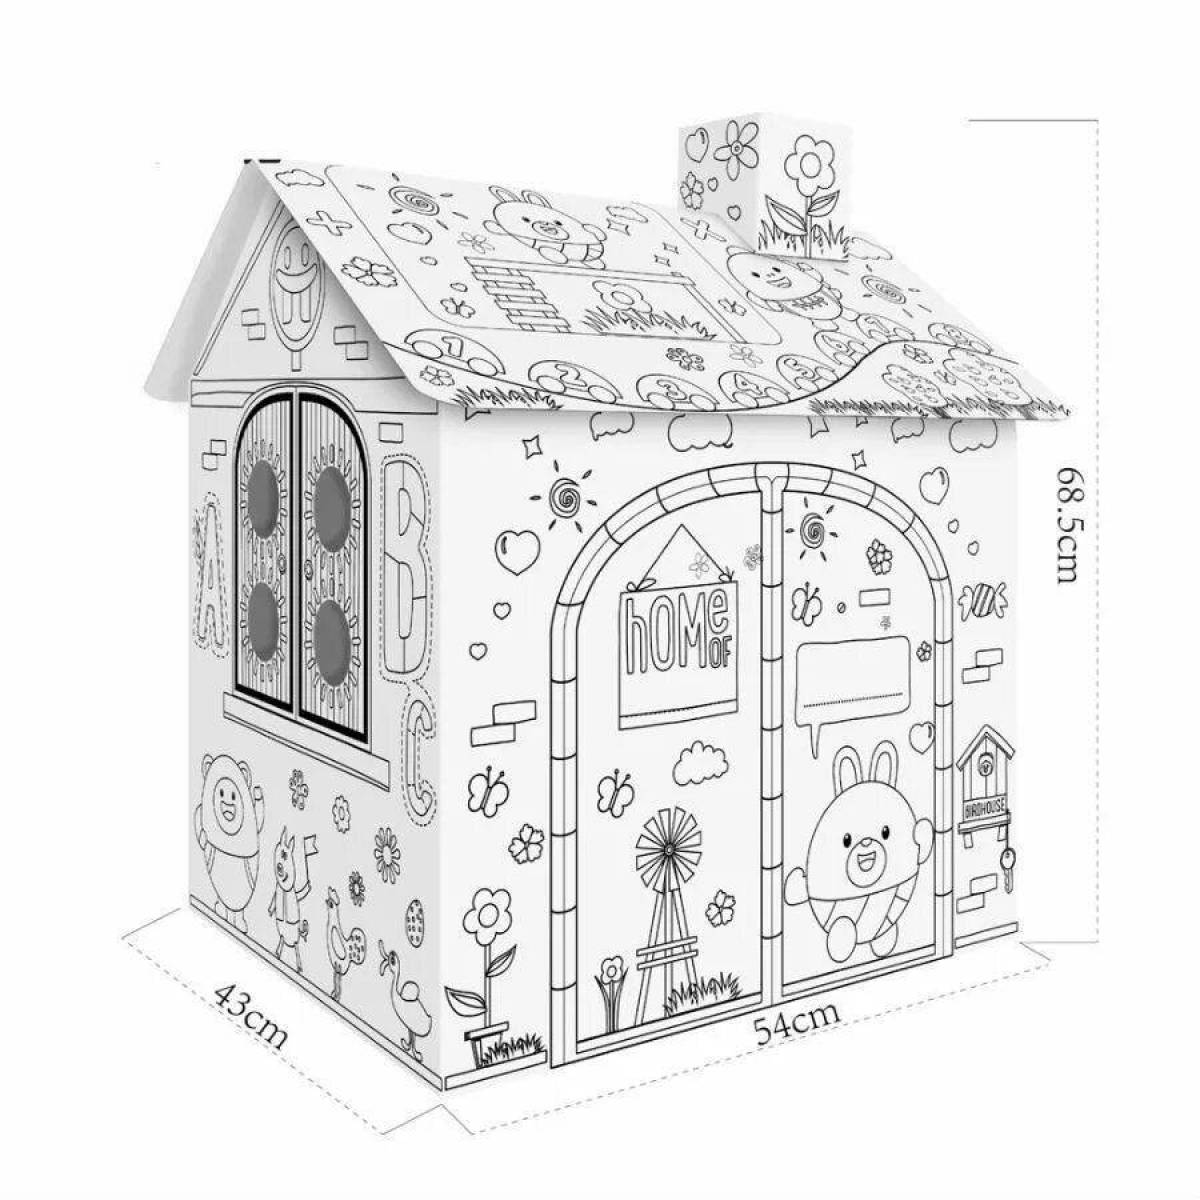 Coloring page of the rich family's luxurious house